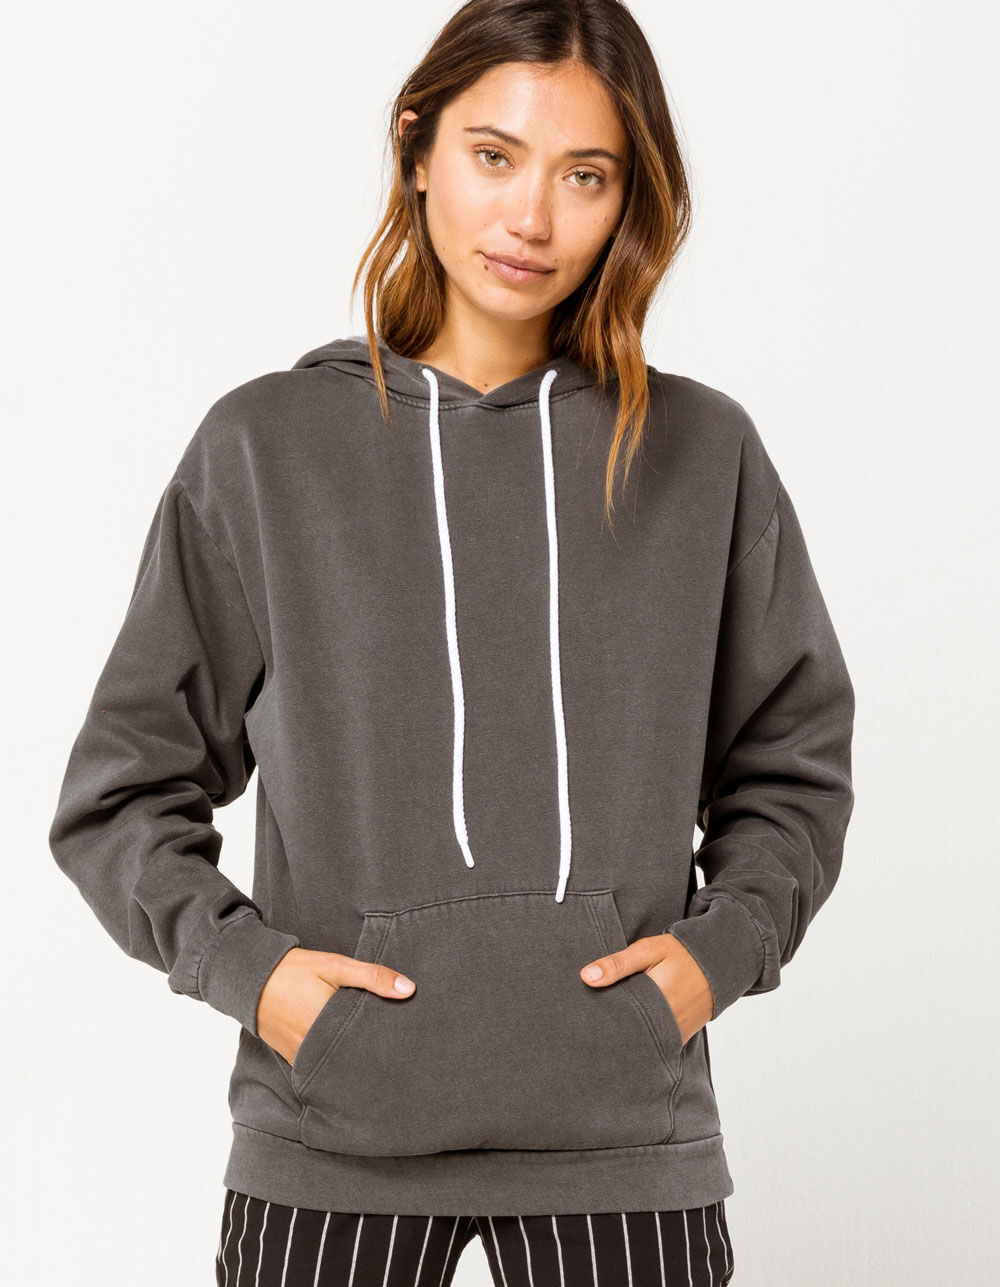 SKY AND SPARROW Mineral Womens Oversized Hoodie - MINERAL | Tillys